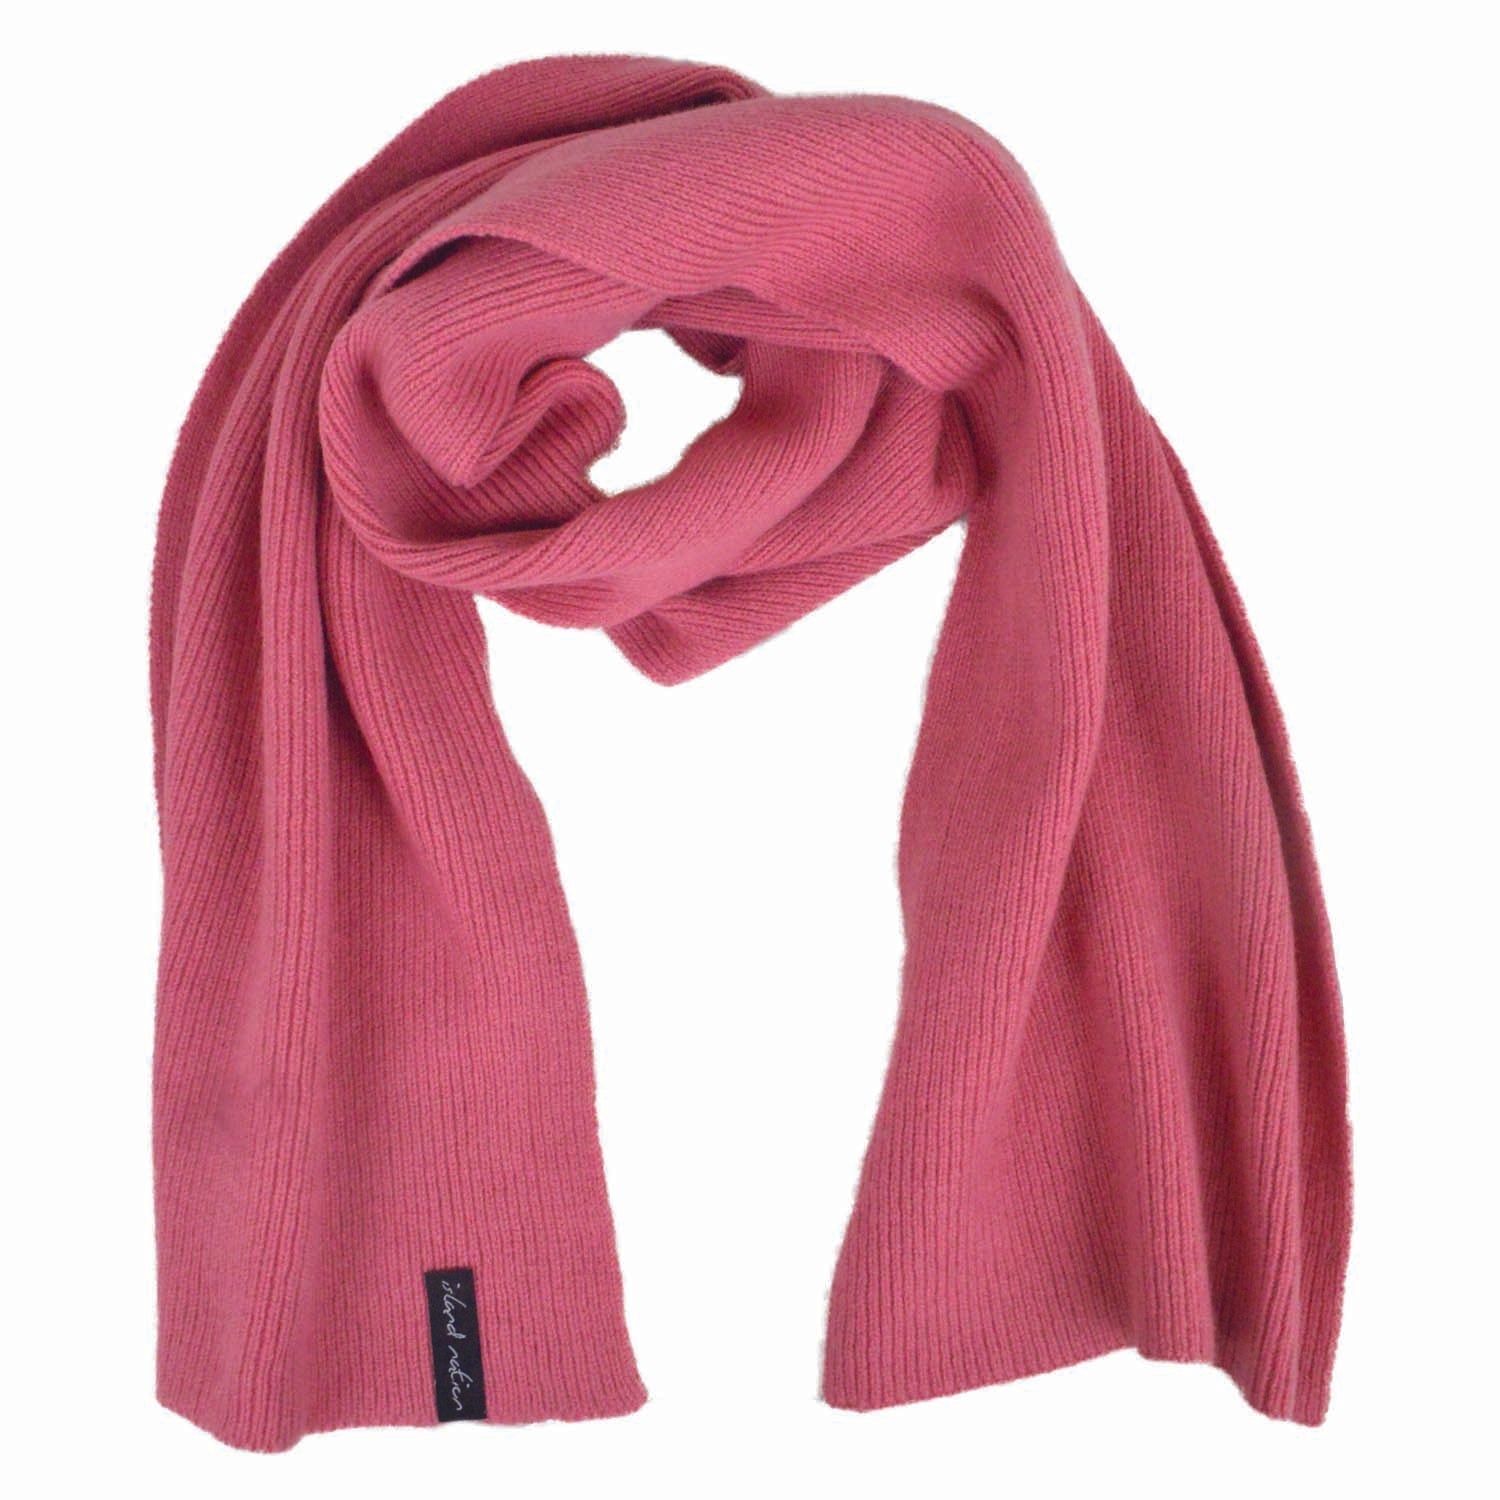 Unisex Scarf in Dusky Pink - Made Scotland